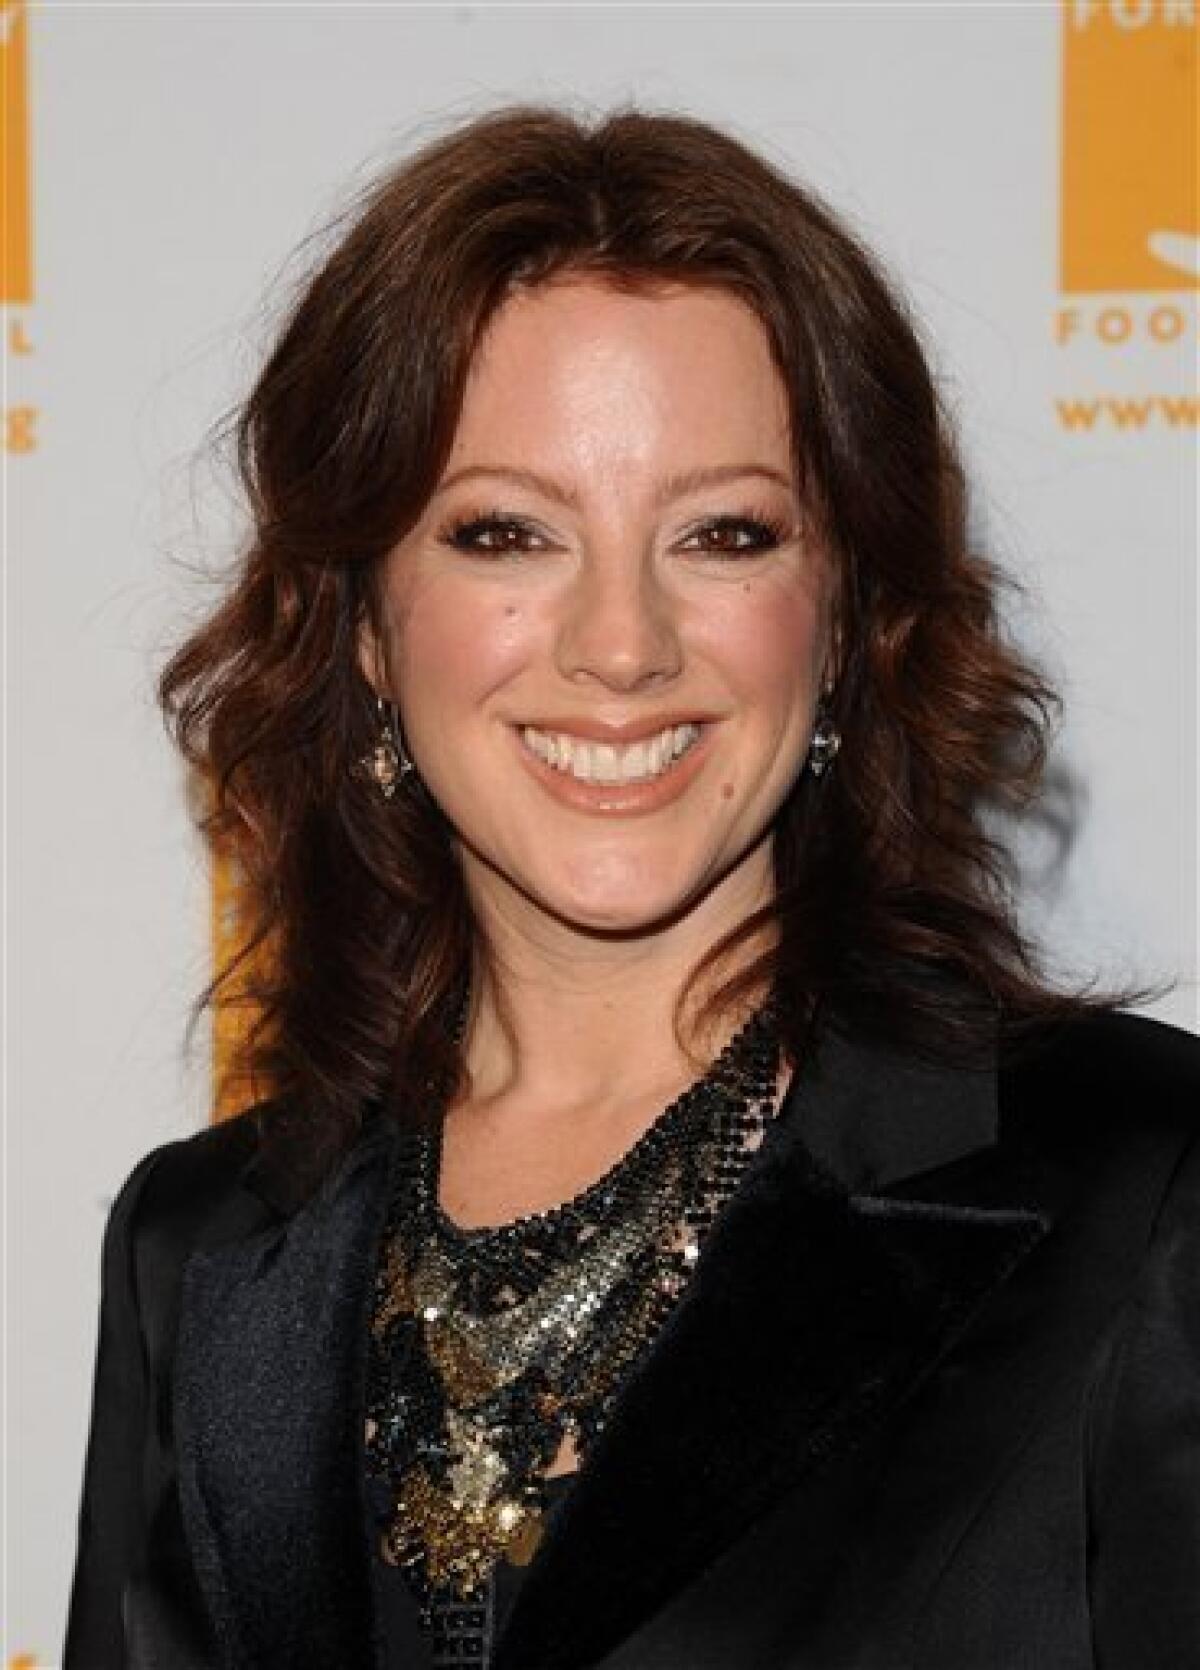 FILE - In this April 7, 2011 file photo, singer Sarah McLachlan attends the Food Banks Can Do Awards gala in New York. McLachlan will perform at the Blue Tie-Blue Jean Ball, a fundraiser to benefit Autism Speaks, an international science and advocacy organization. The Blue Tie-Blue Jean Ball will be held Dec. 1 at the House of Blues in Los Angeles. (AP Photo/Peter Kramer, file)